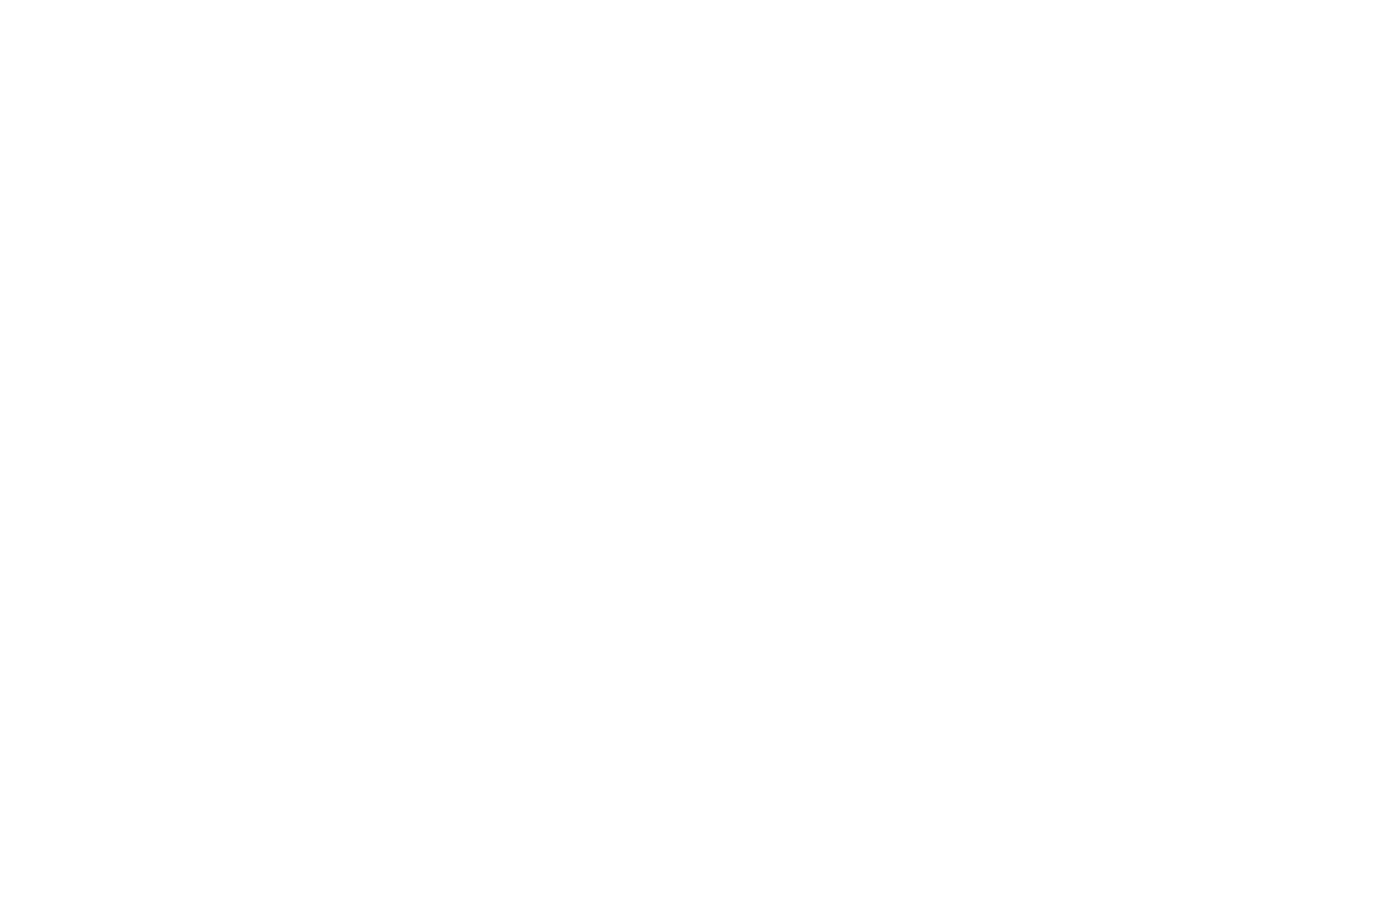 CA Logos_Ecover WHITE.png